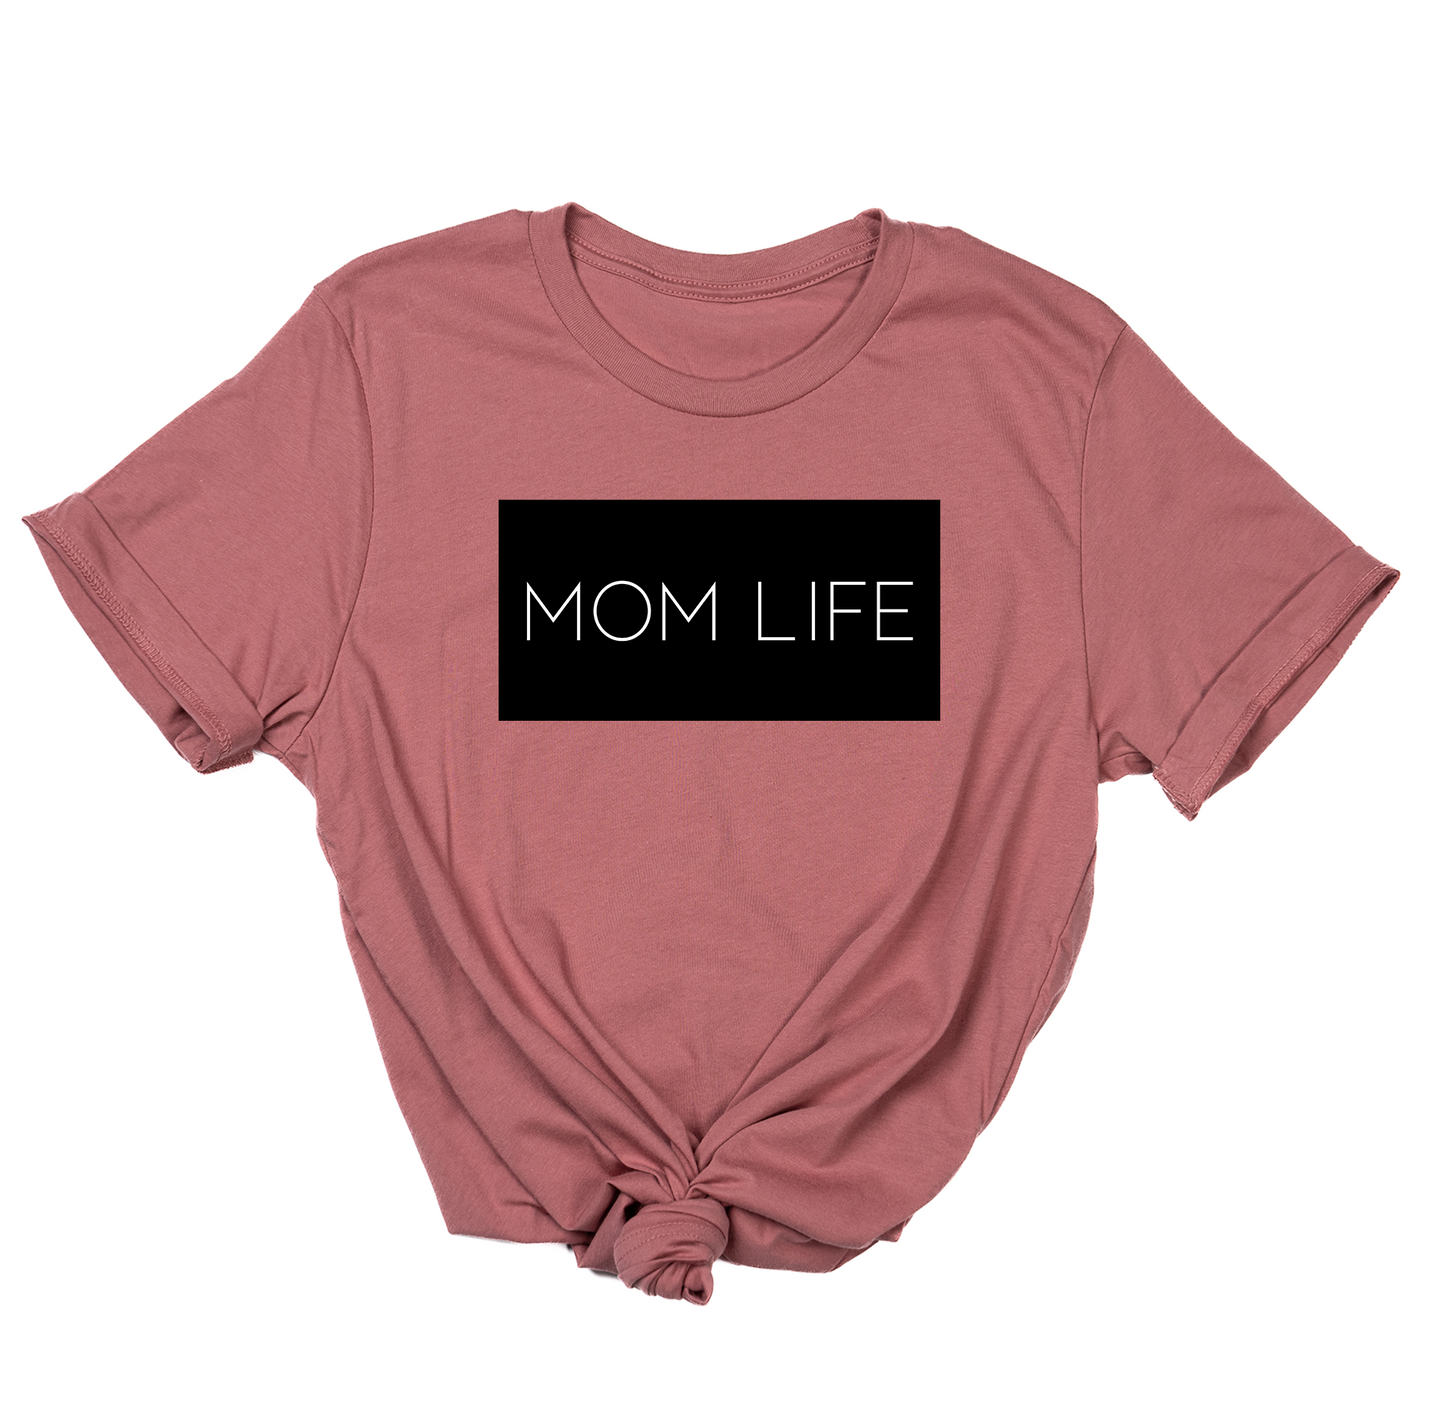 Mom Life (Boxed Collection, Black Box/White Text, Across Front) - Tee (Mauve)